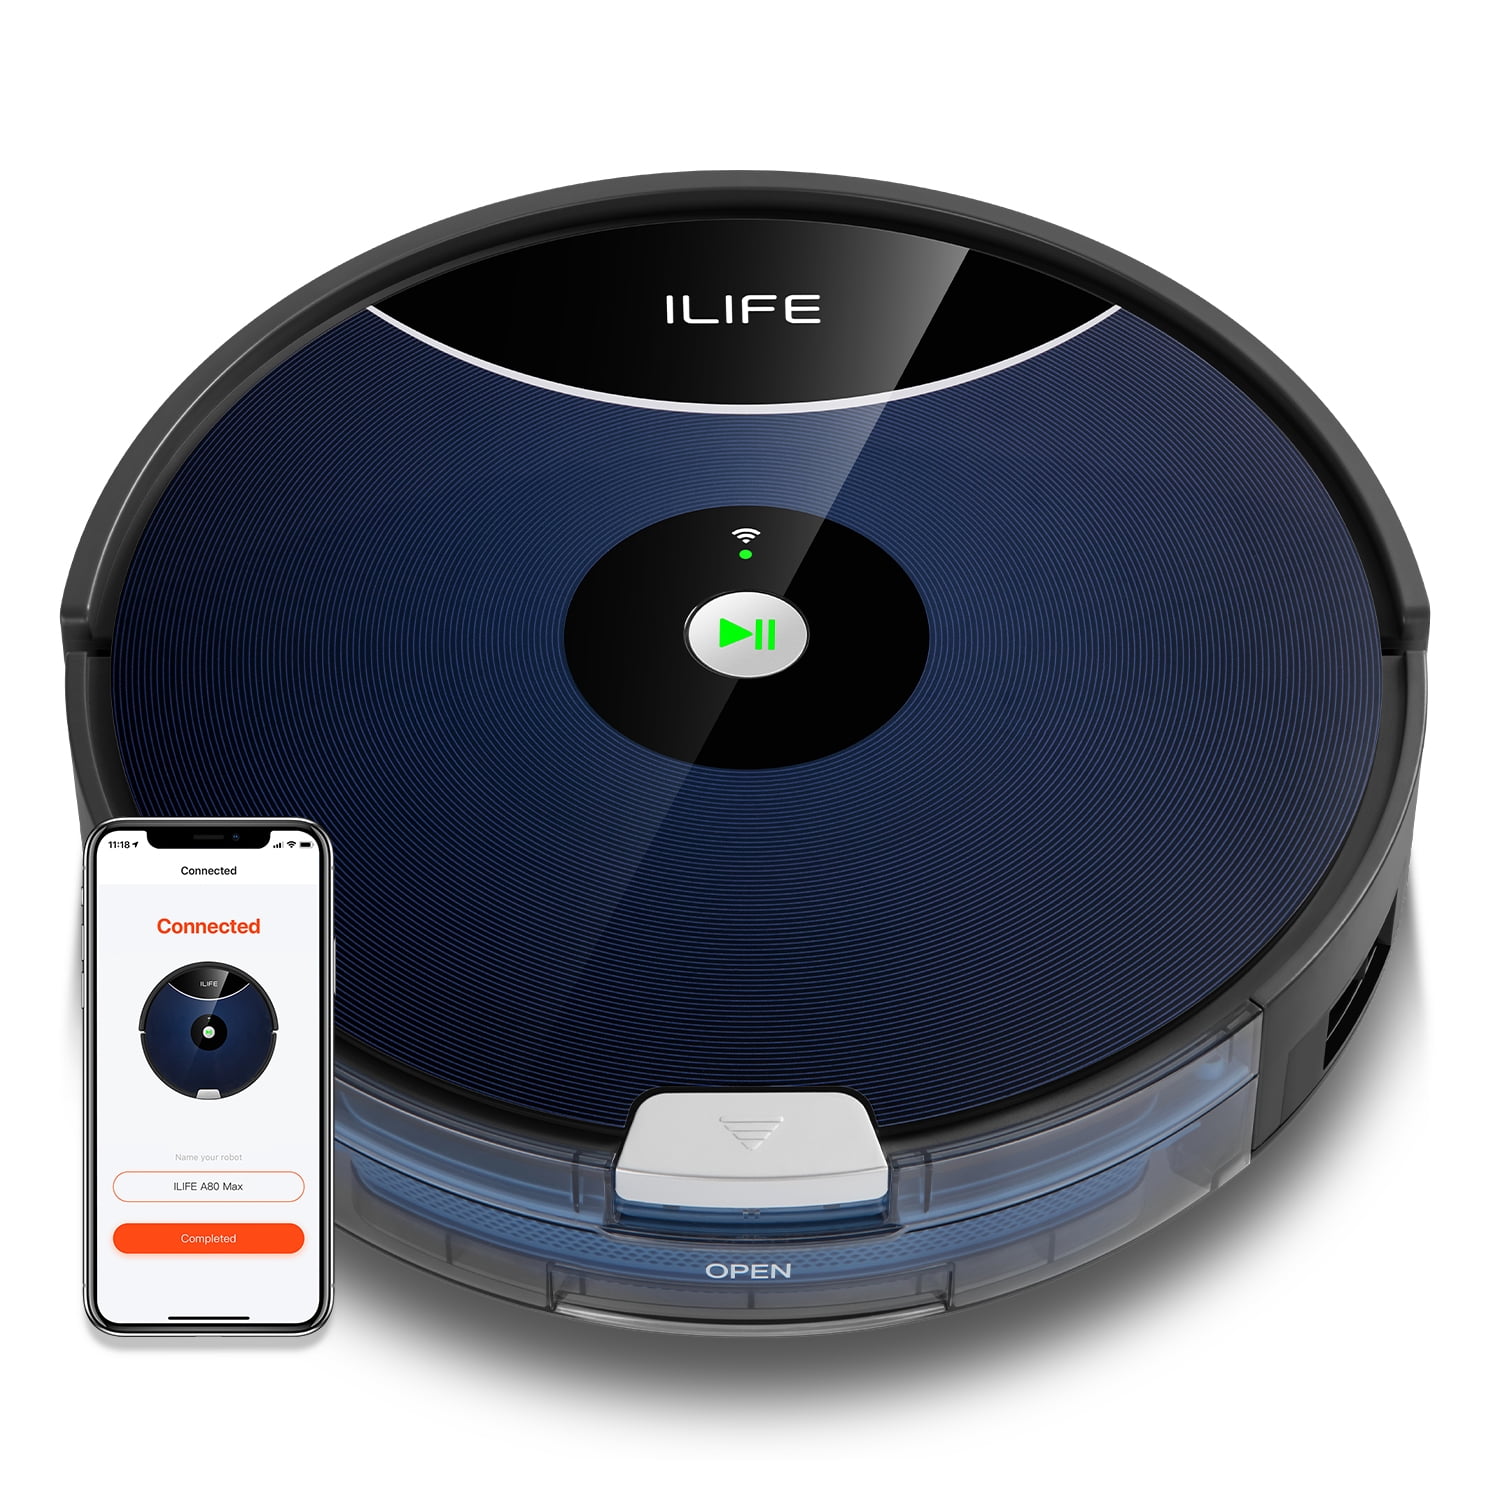 ILIFE A80 Max-W Robot Vacuum Cleaner, 2000Pa, Wi-Fi, 2-in-1 Roller Brush